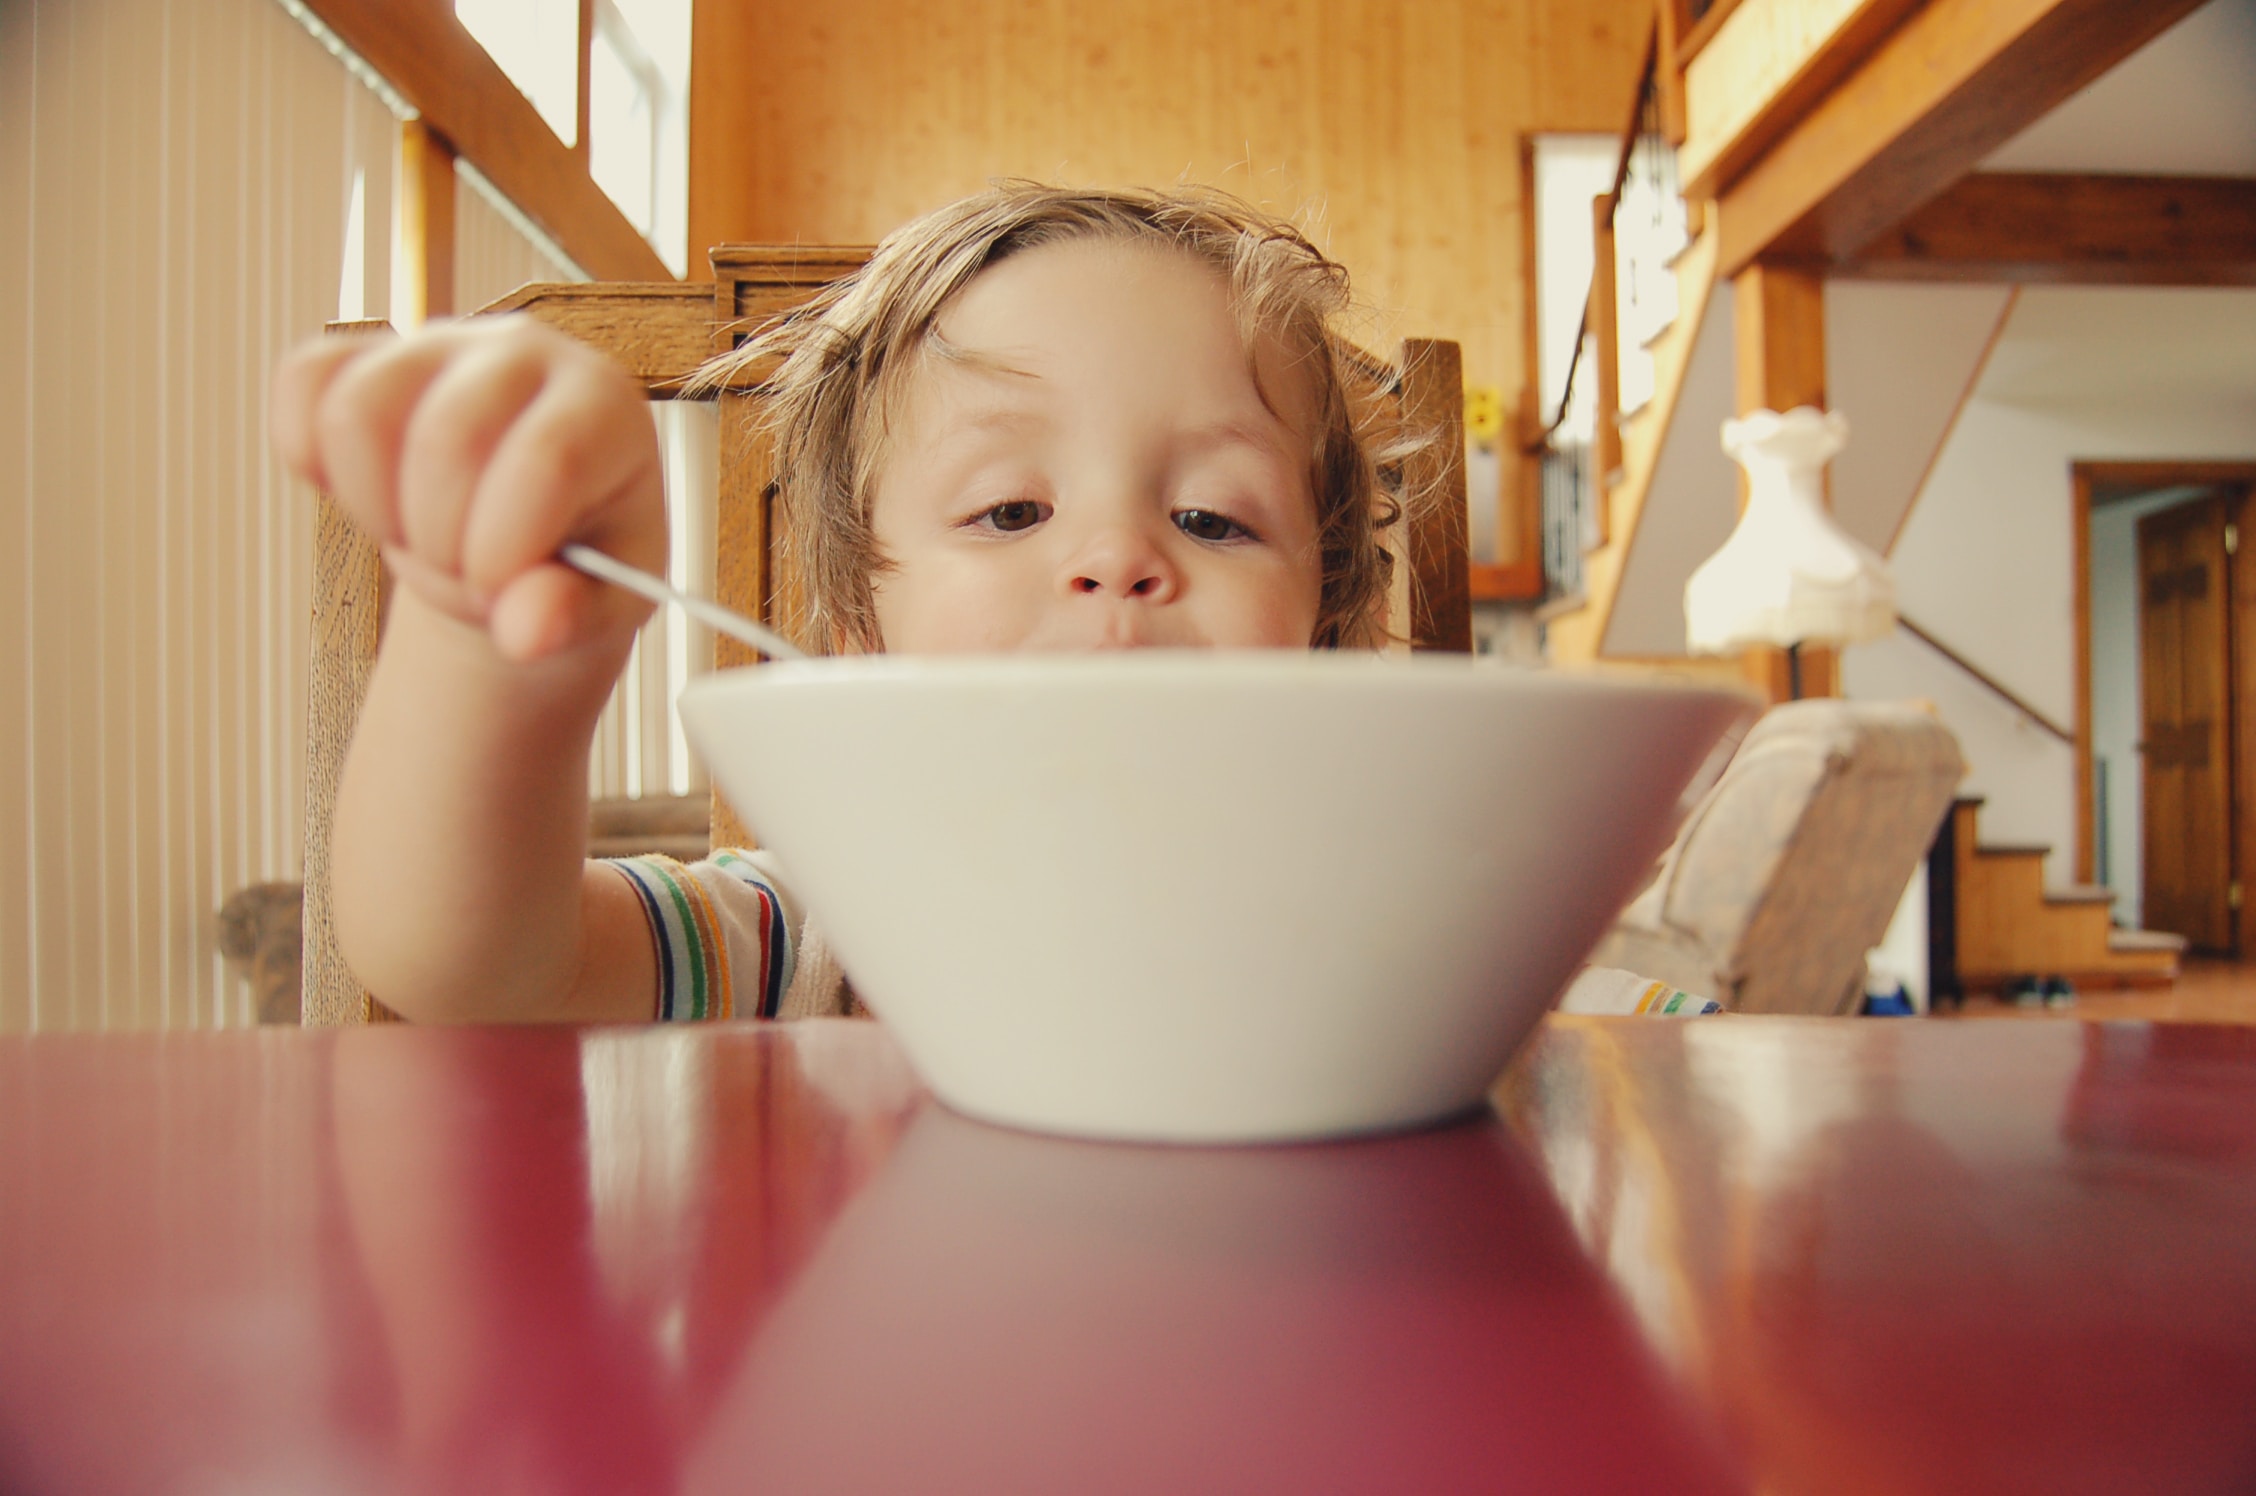 Small child eating their meal from a bowl